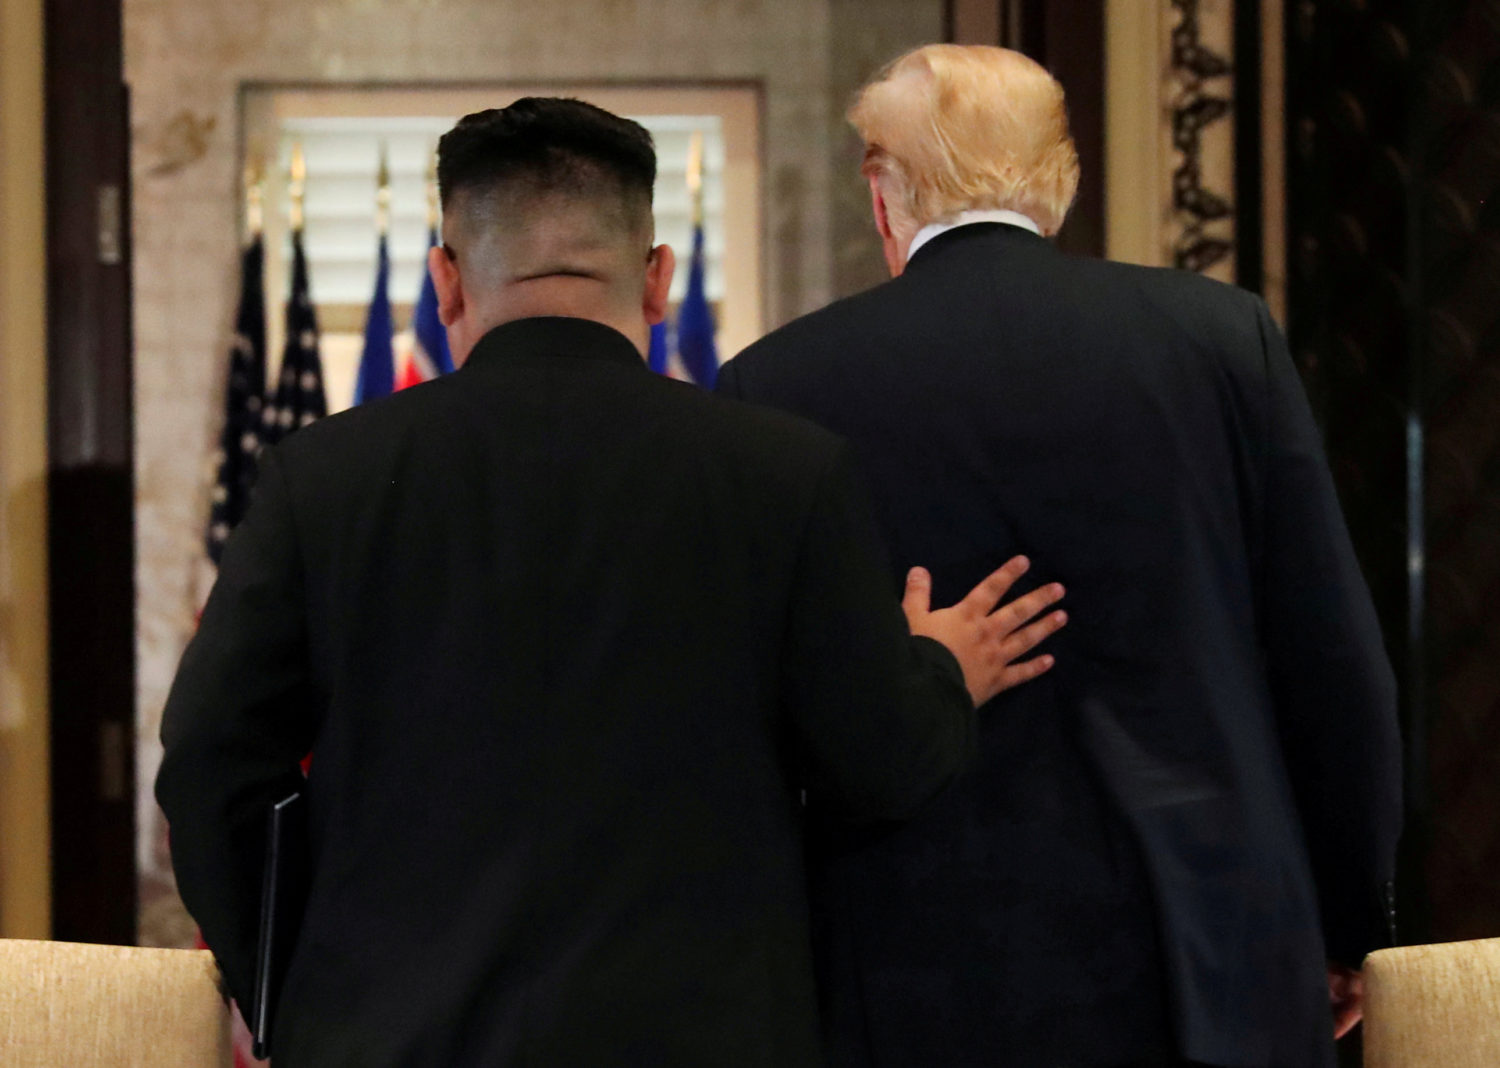 U.S. President Donald Trump and North Korea's leader Kim Jong Un leave after signing documents that acknowledge the progress of the talks and pledge to keep momentum going, after their summit at the Capella Hotel on Sentosa island in Singapore June 12, 2018. REUTERS/Jonathan Ernst